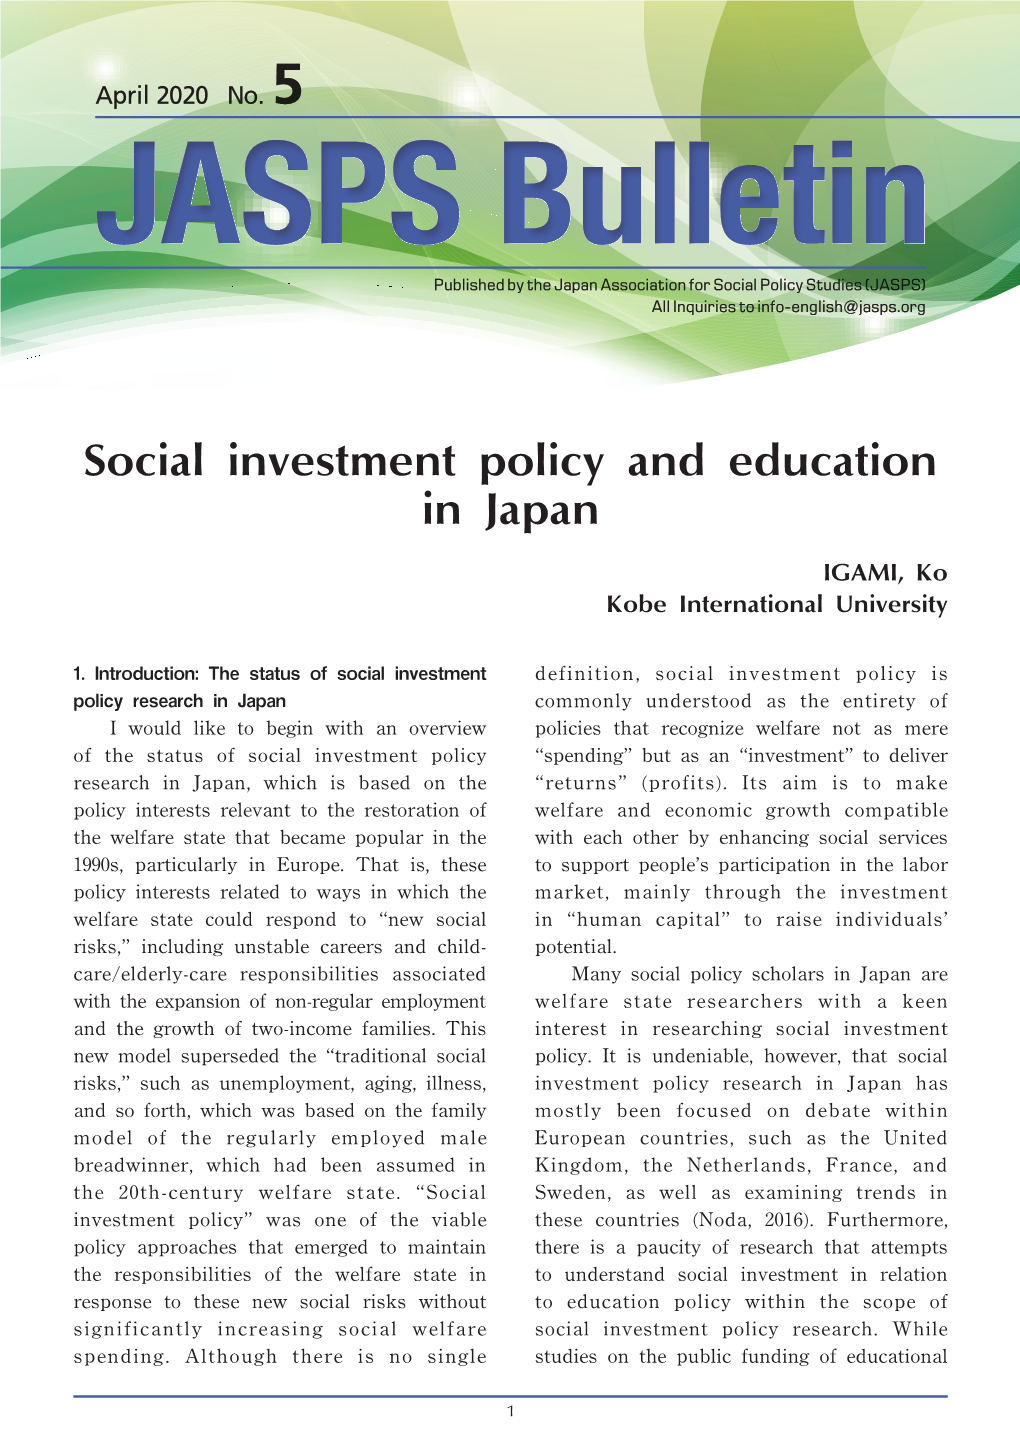 Social Investment Policy and Education in Japan